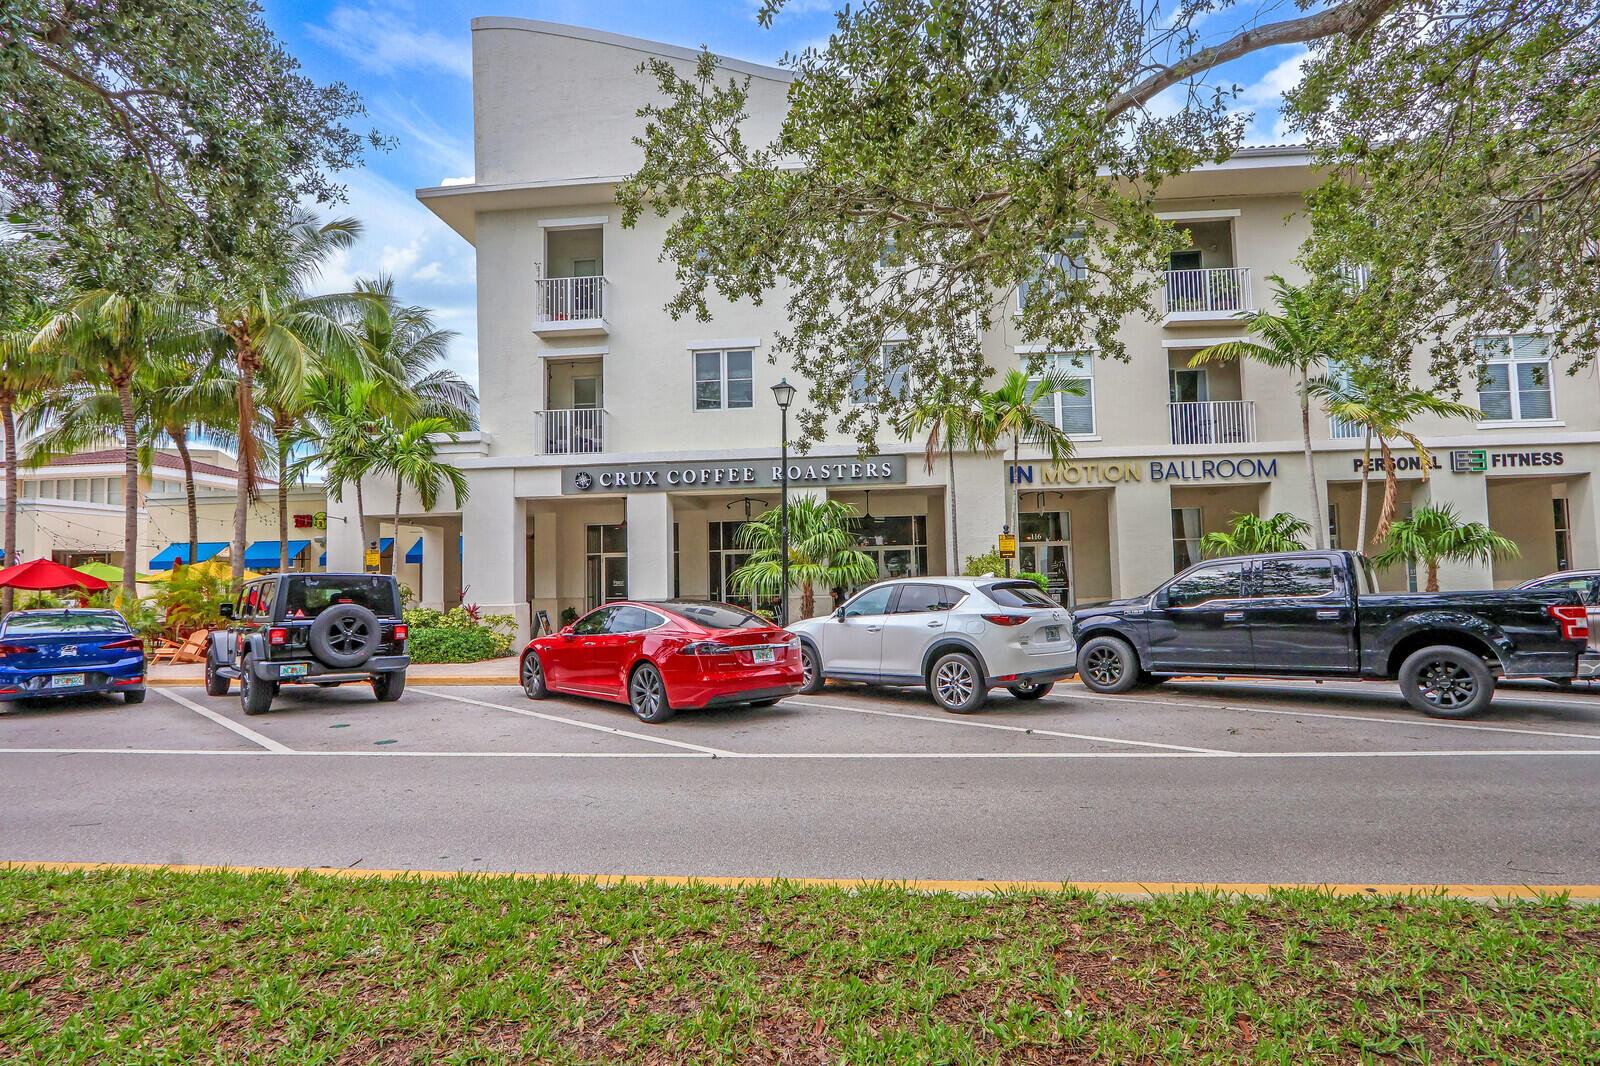 This 2 bedroom condo is located in the Village at Abacoa directly above the coffee shop and only steps from restaurants, shops, and entertainment. Features include new floors throughout, new stainless steel appliances, washer/dryer in unit, balcony, lobby access, assigned parking and more... AC is 2018, Water Heater is 2021. The unit was previously rented at $2500 per month, $3000 per month is possible. Cable tv and high speed internet are included in the monthly condo dues.